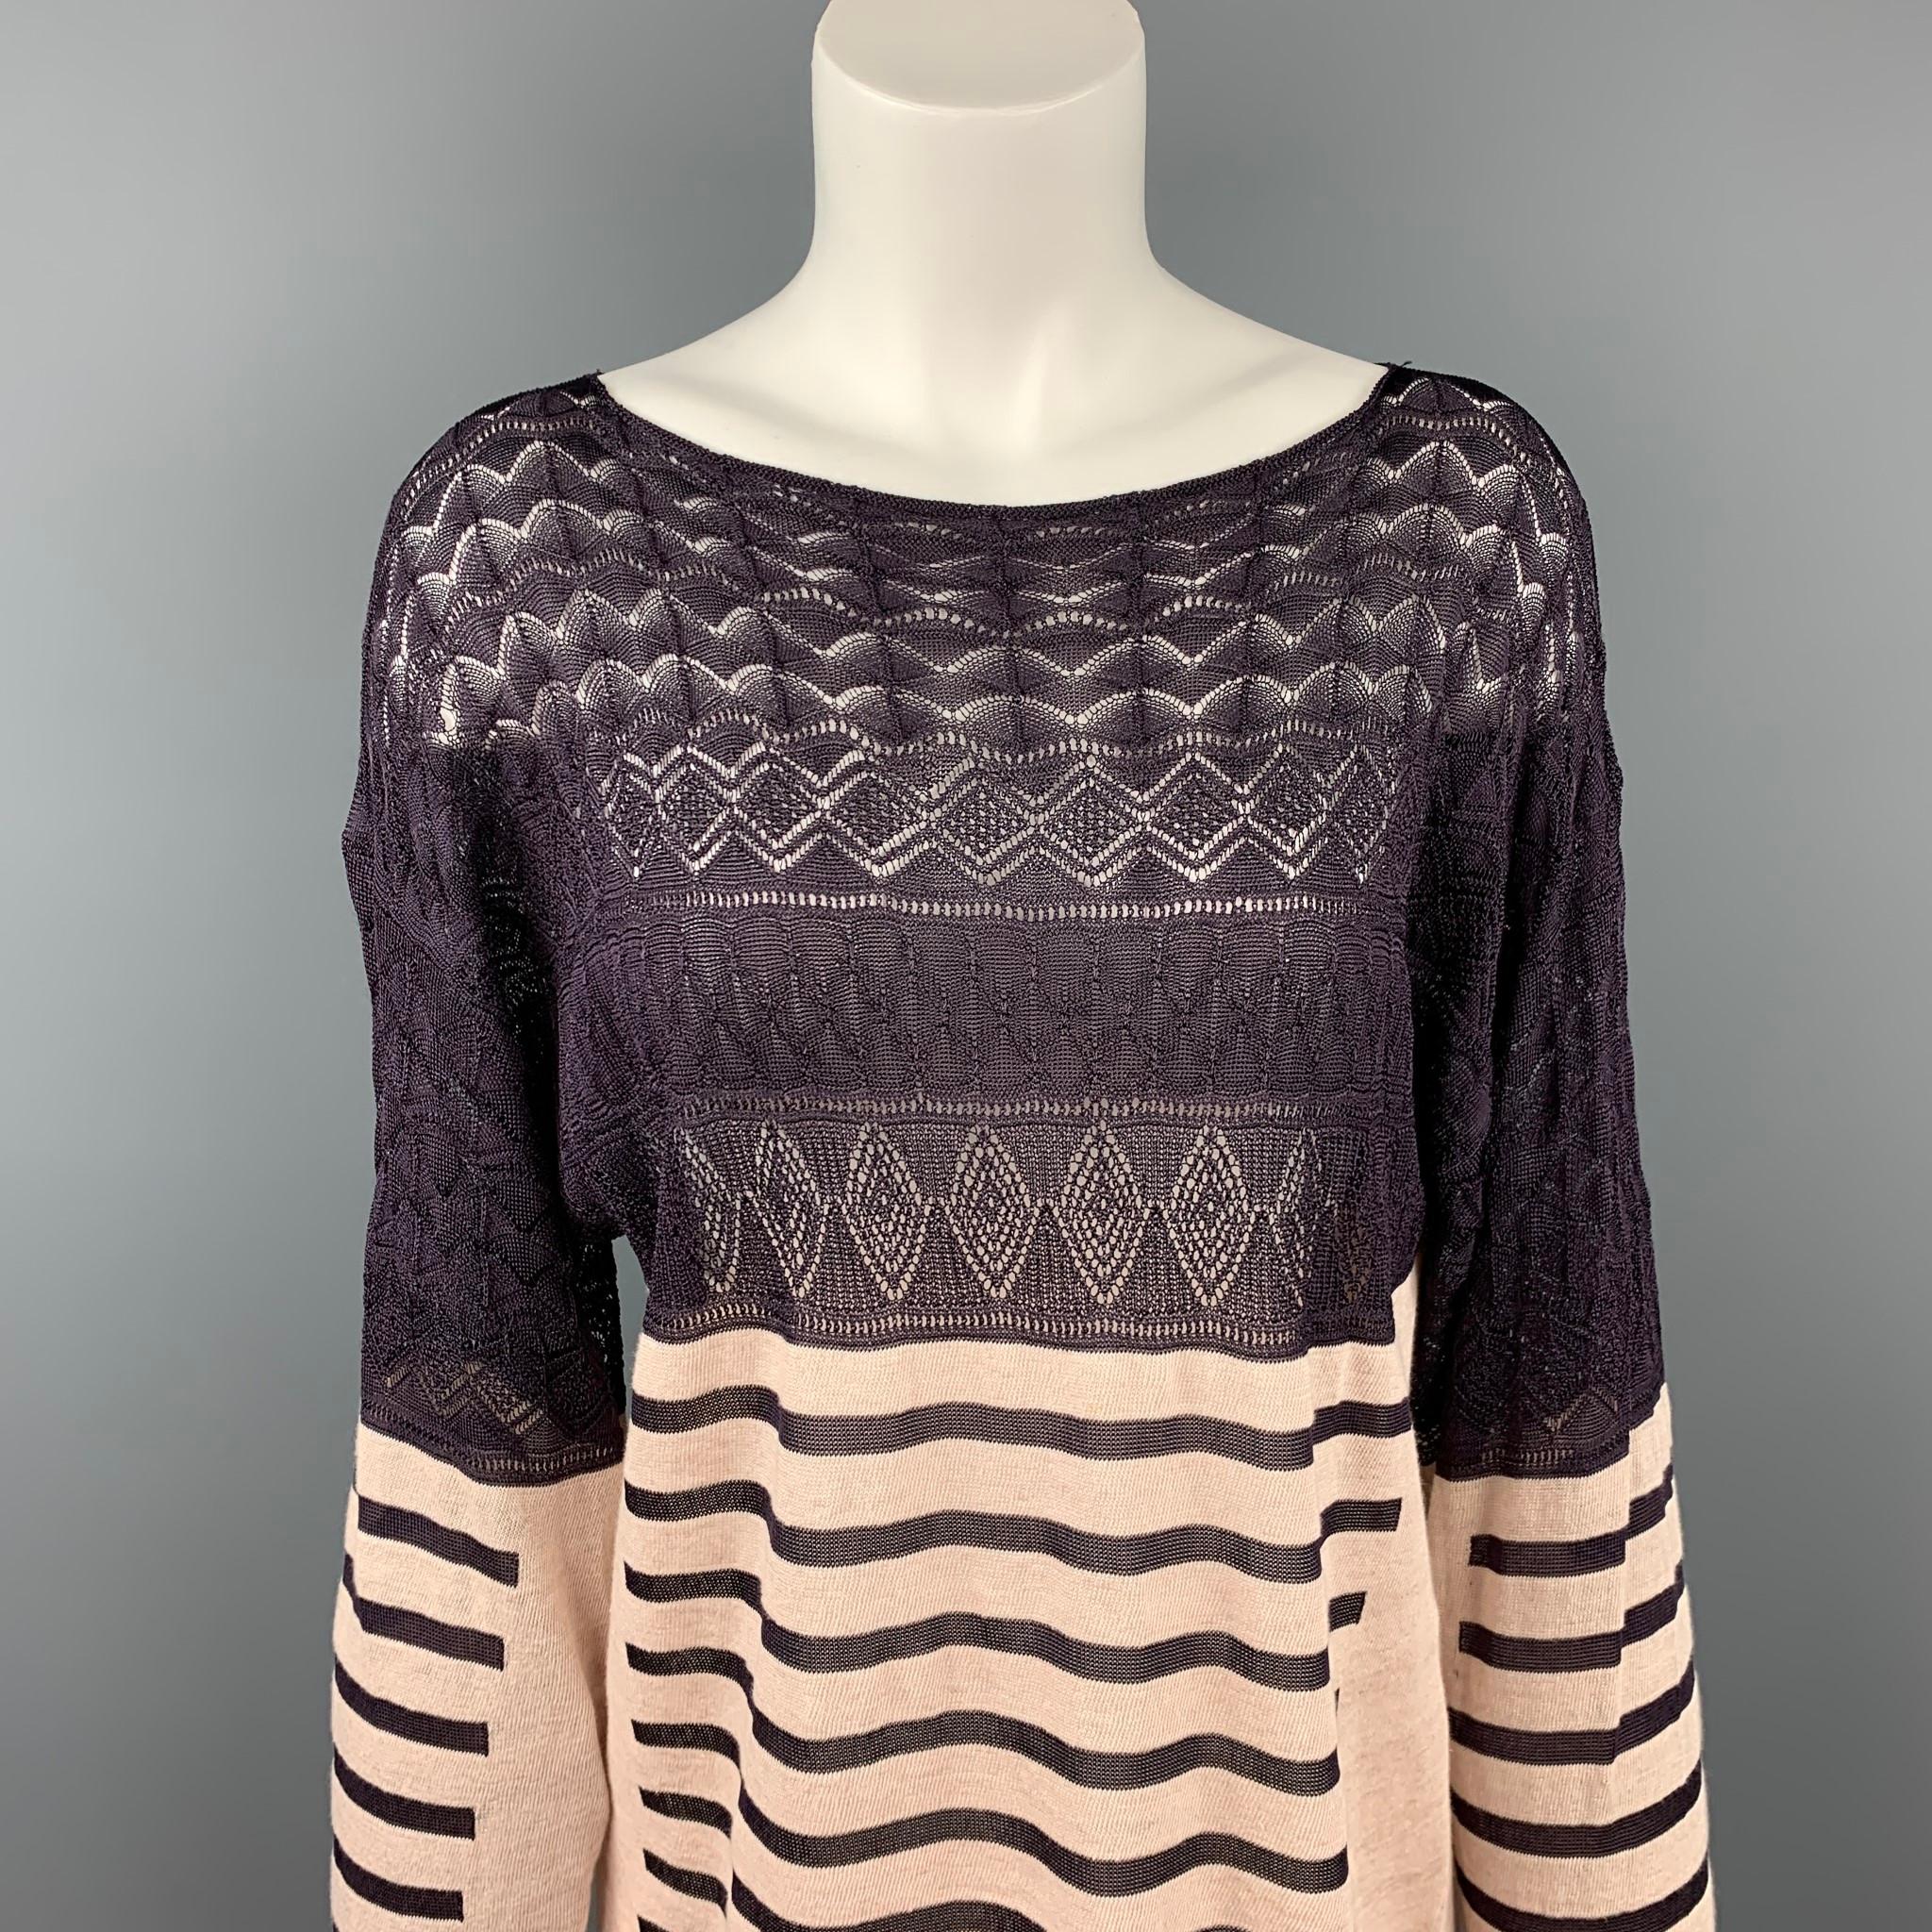 GAULTIER 2 pullover comes in a eggplant & khaki linen featuring a stripe trim, drawstring, and a boat neck. Made in Italy.

Very Good Pre-Owned Condition.
Marked: M

Measurements:

Shoulder: 22 in.
Bust: 42 in.
Sleeve: 23 in.
Length: 25 in. 